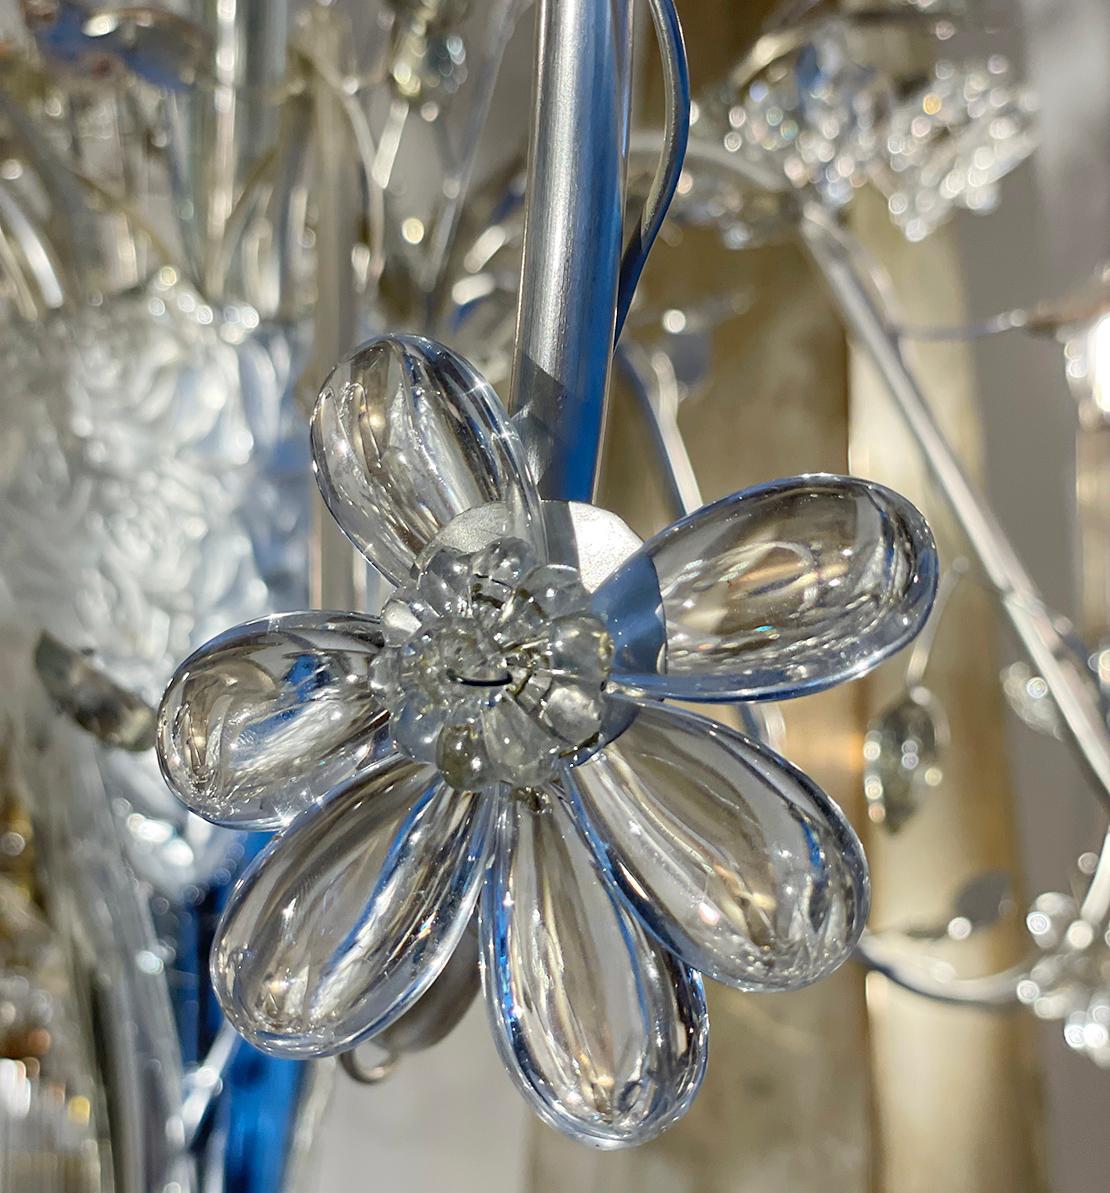 A circa 1950's French six-arm silver-leafed chandelier with molded glass leaves, crystal flowers and mercury glass vase body.

Measurements:
Height of body: 27